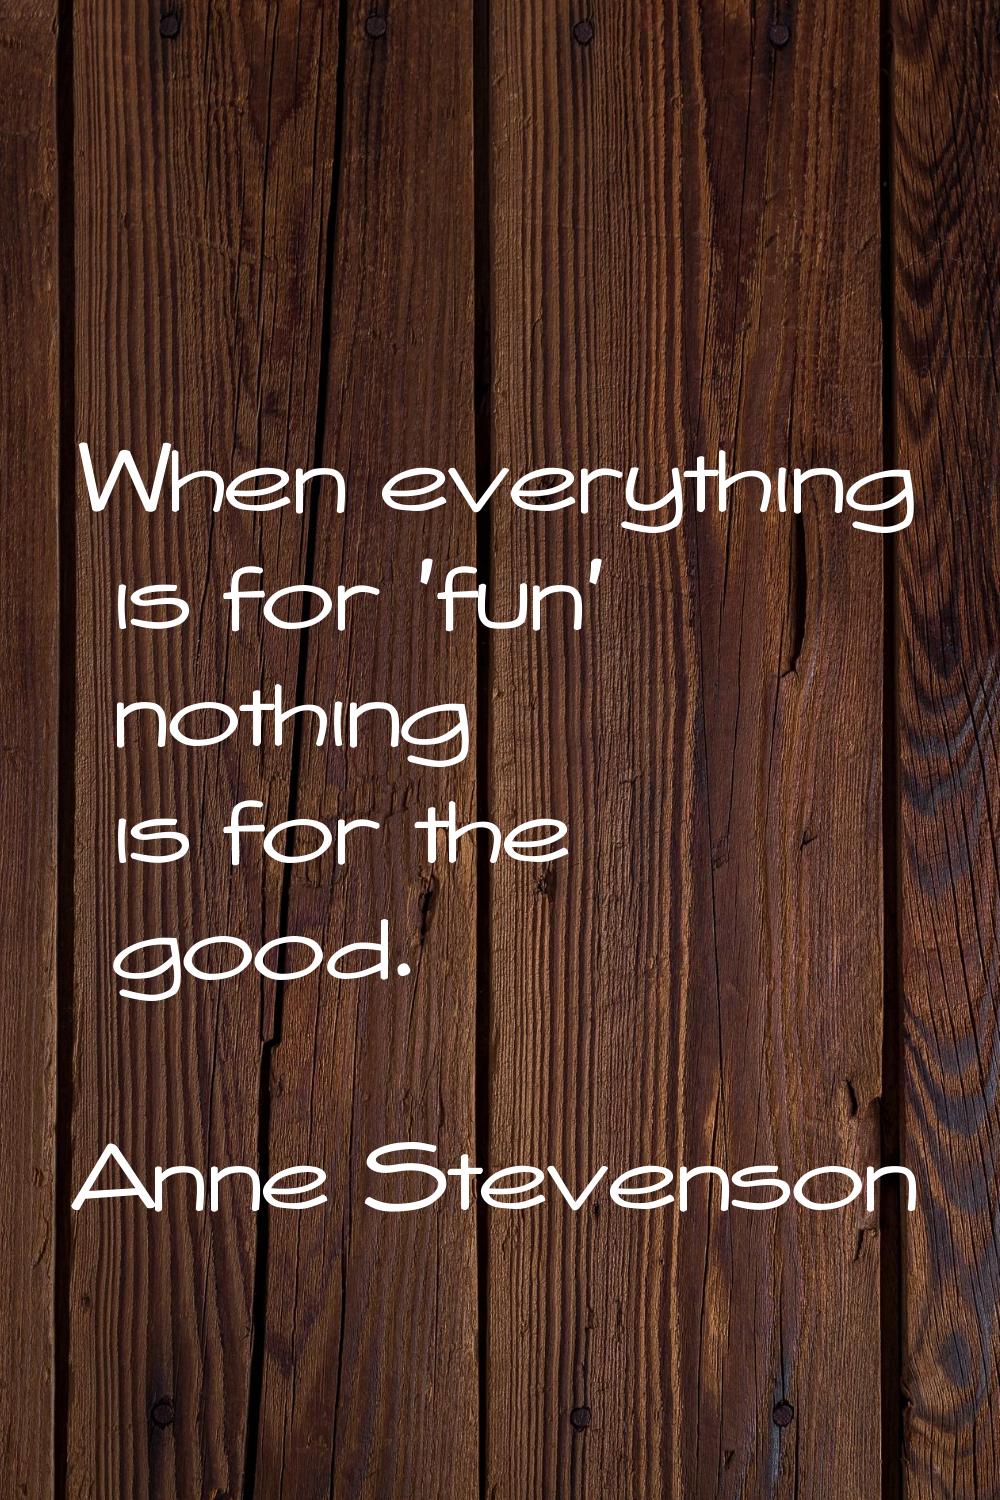 When everything is for 'fun' nothing is for the good.